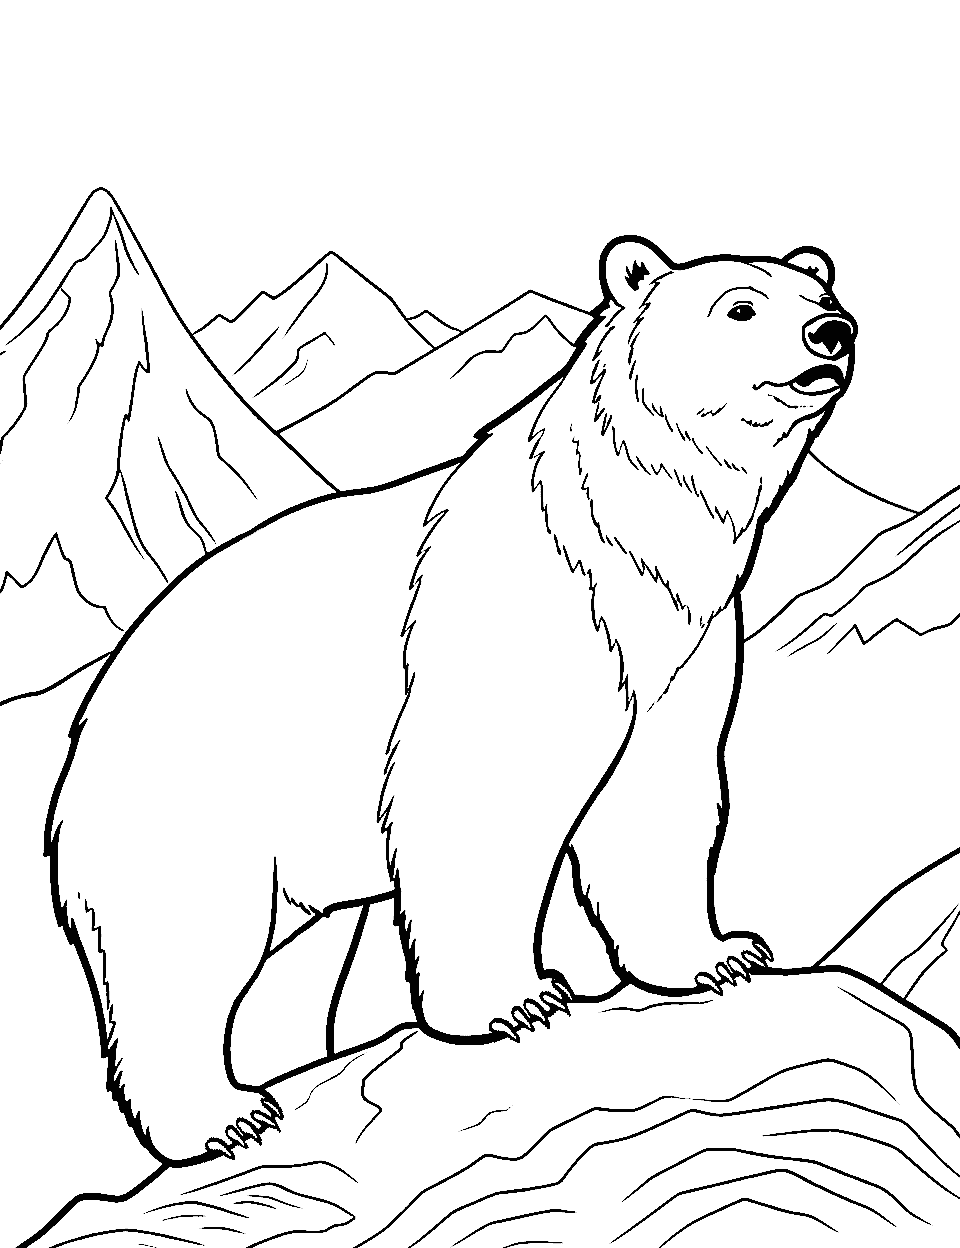 Mountain Top Bear View Coloring Page - A bear on a mountain peak overlooking a vast landscape.